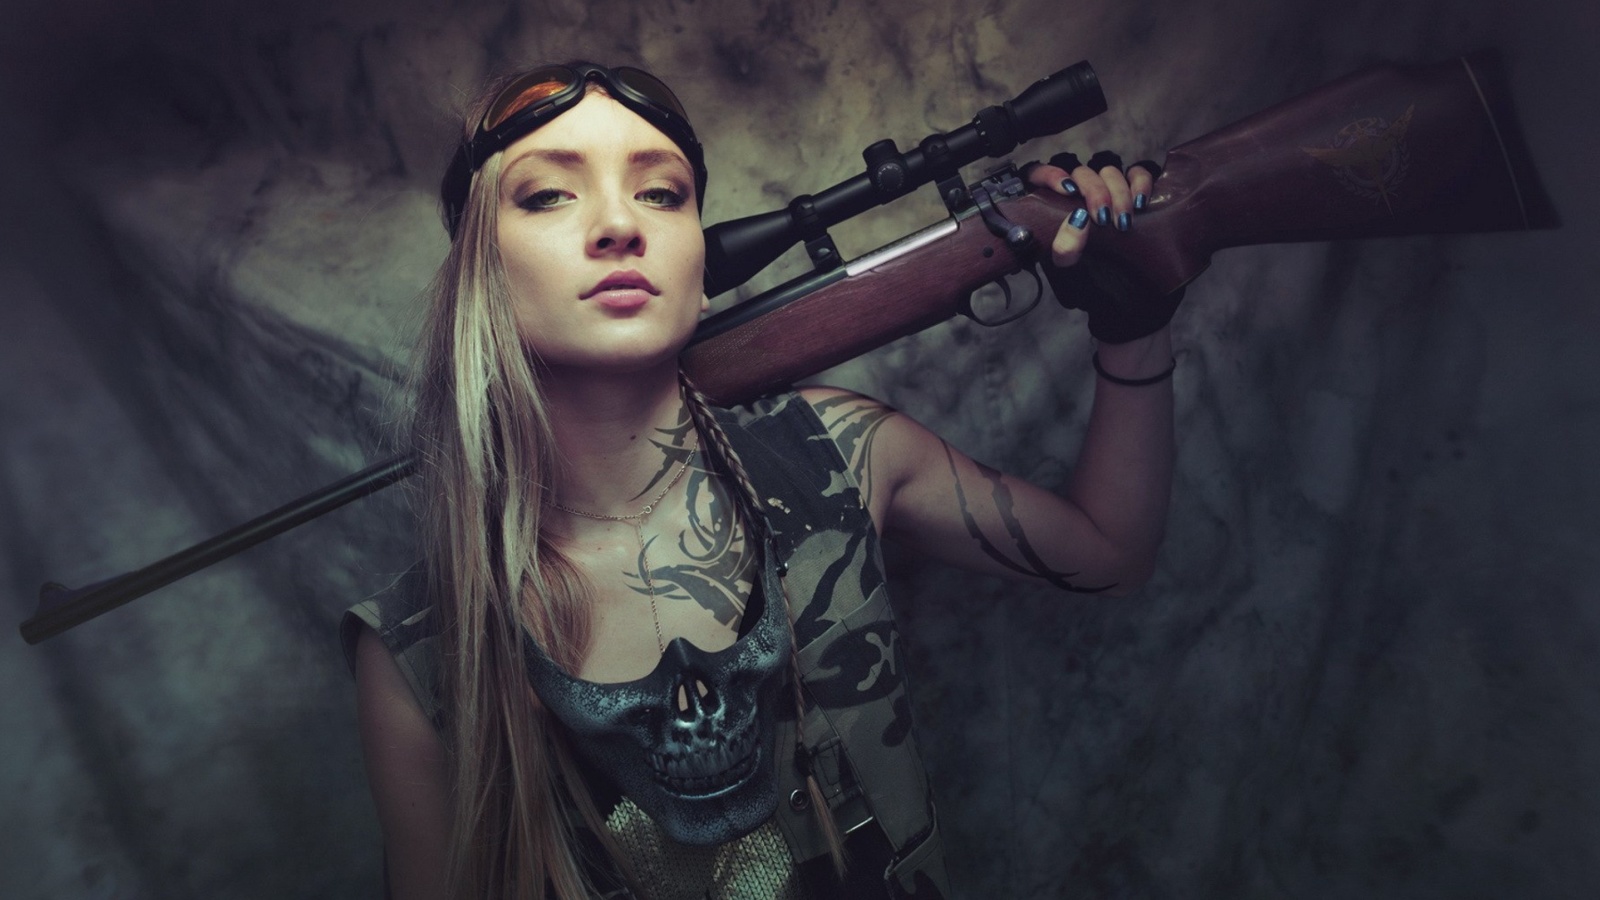 Soldier girl with a sniper rifle wallpaper 1600x900